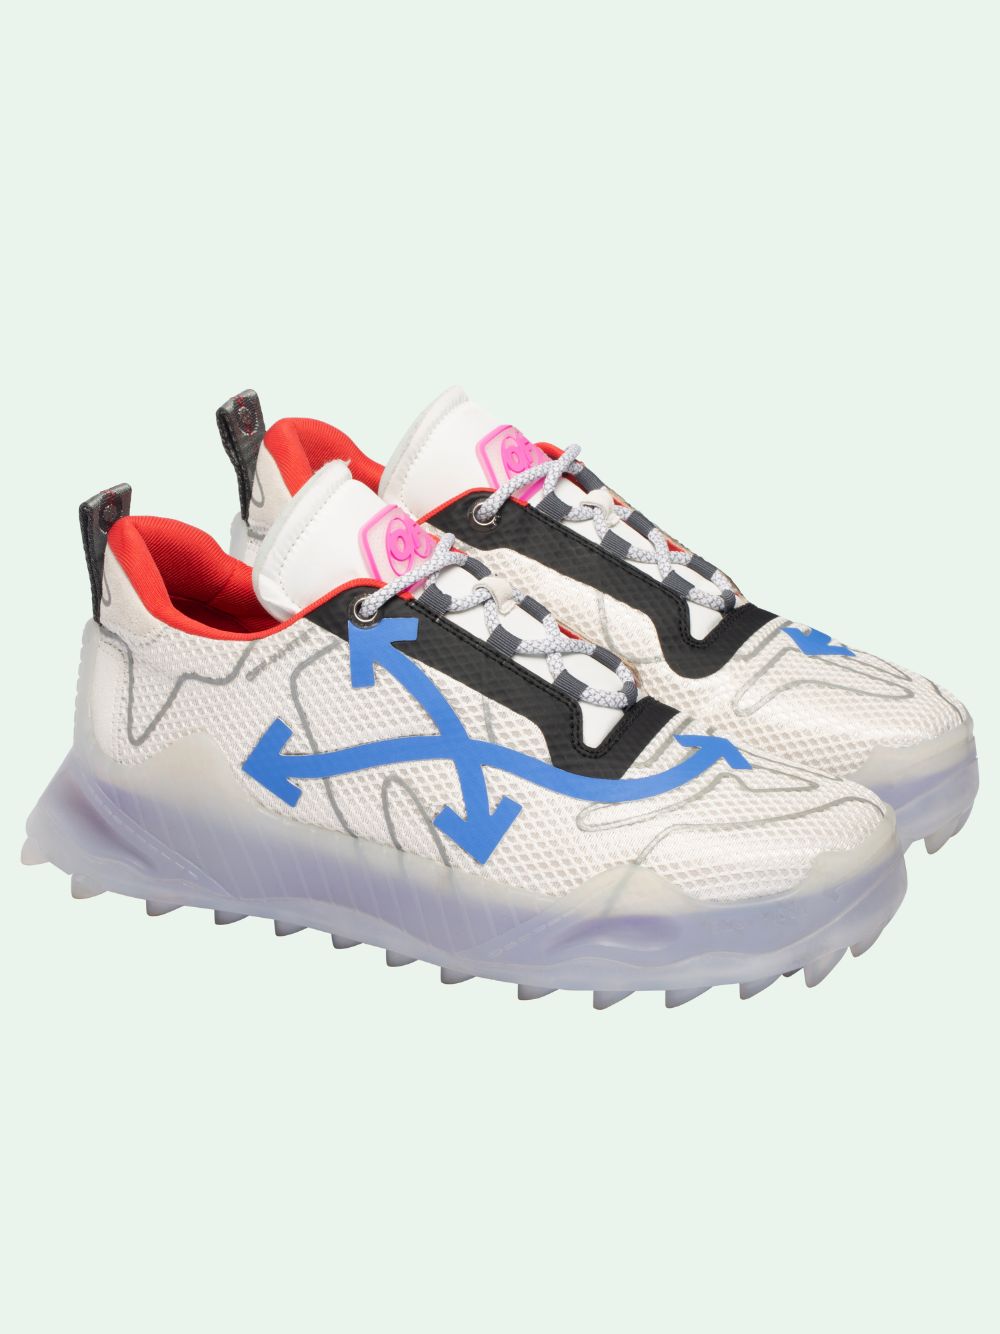 off white shoes odsy